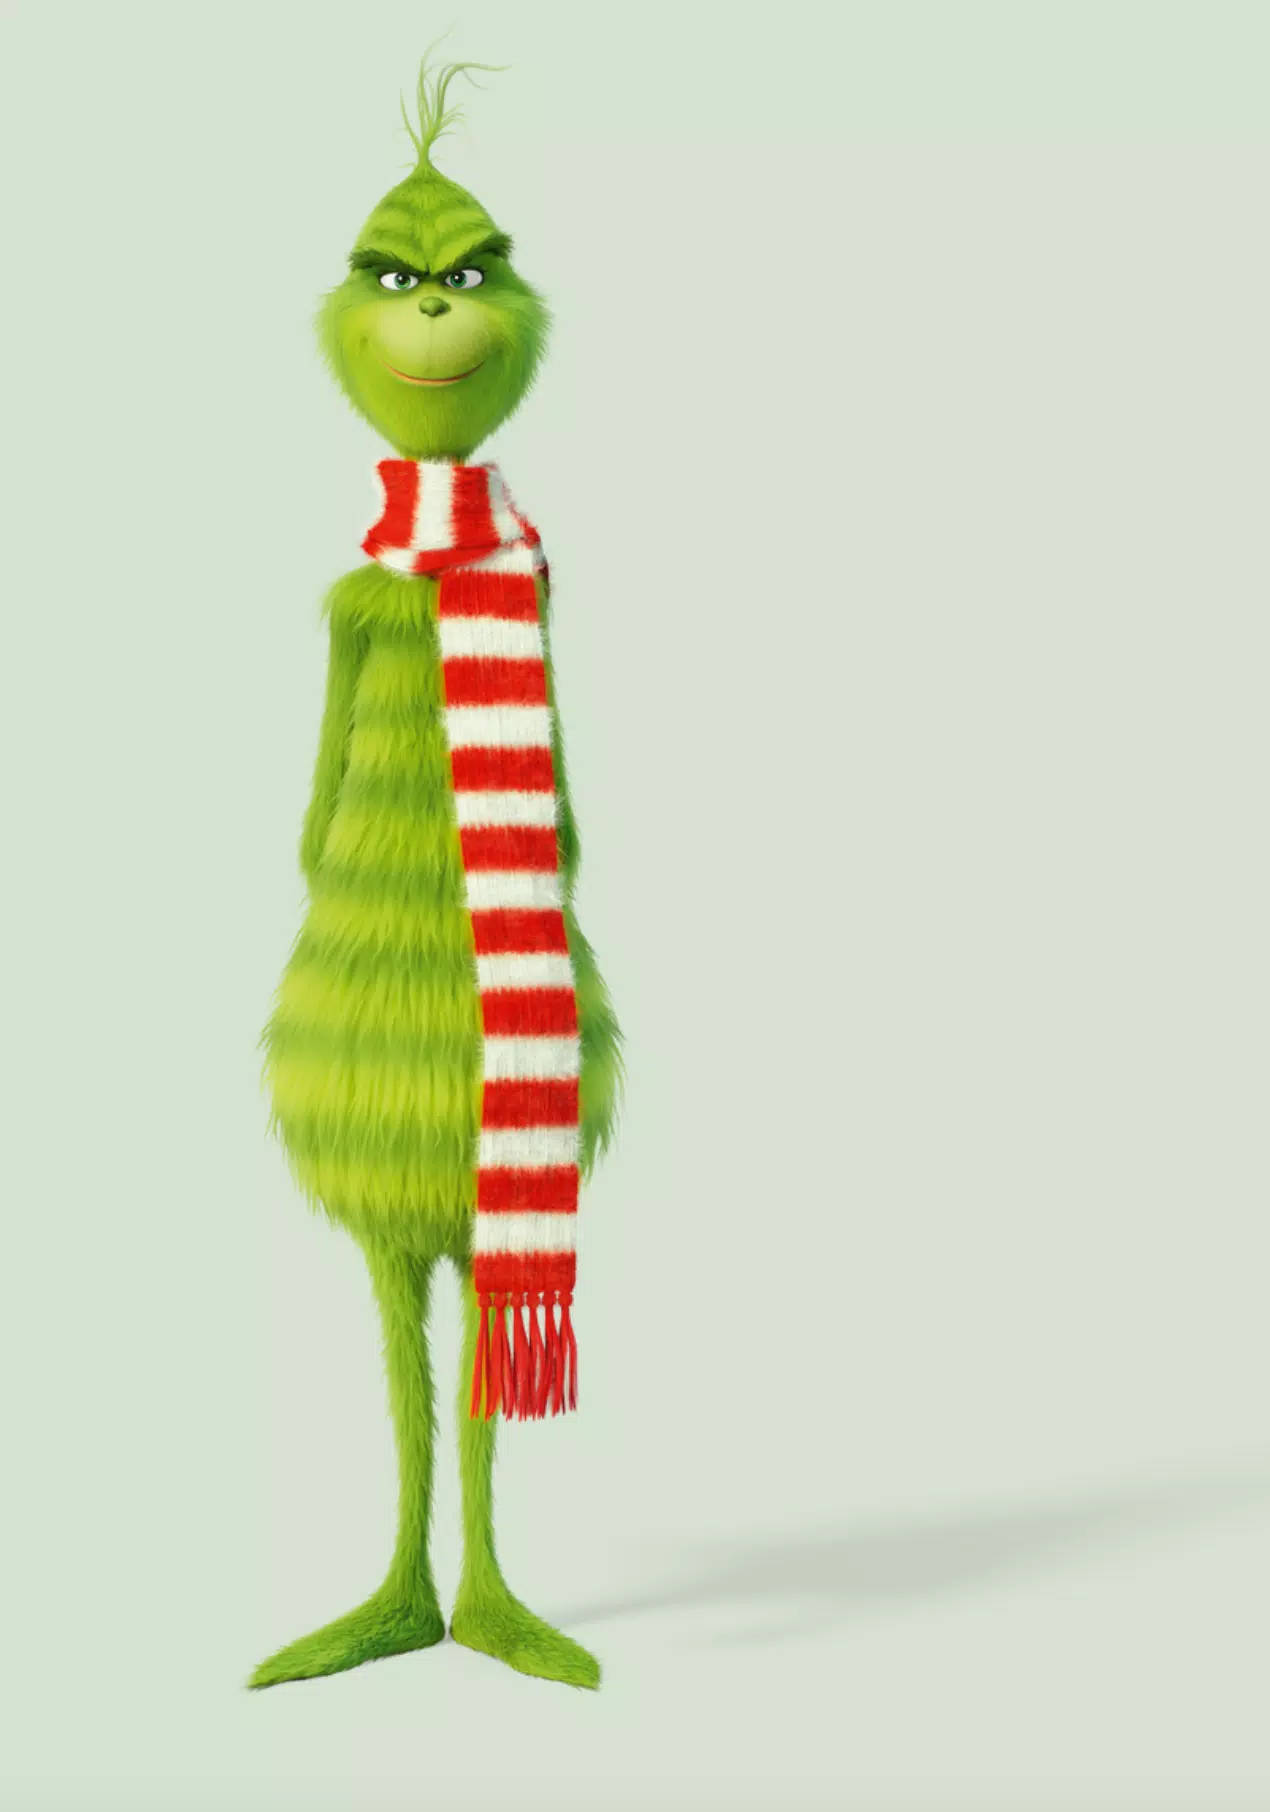 Grinch With Red Scarf Wallpaper